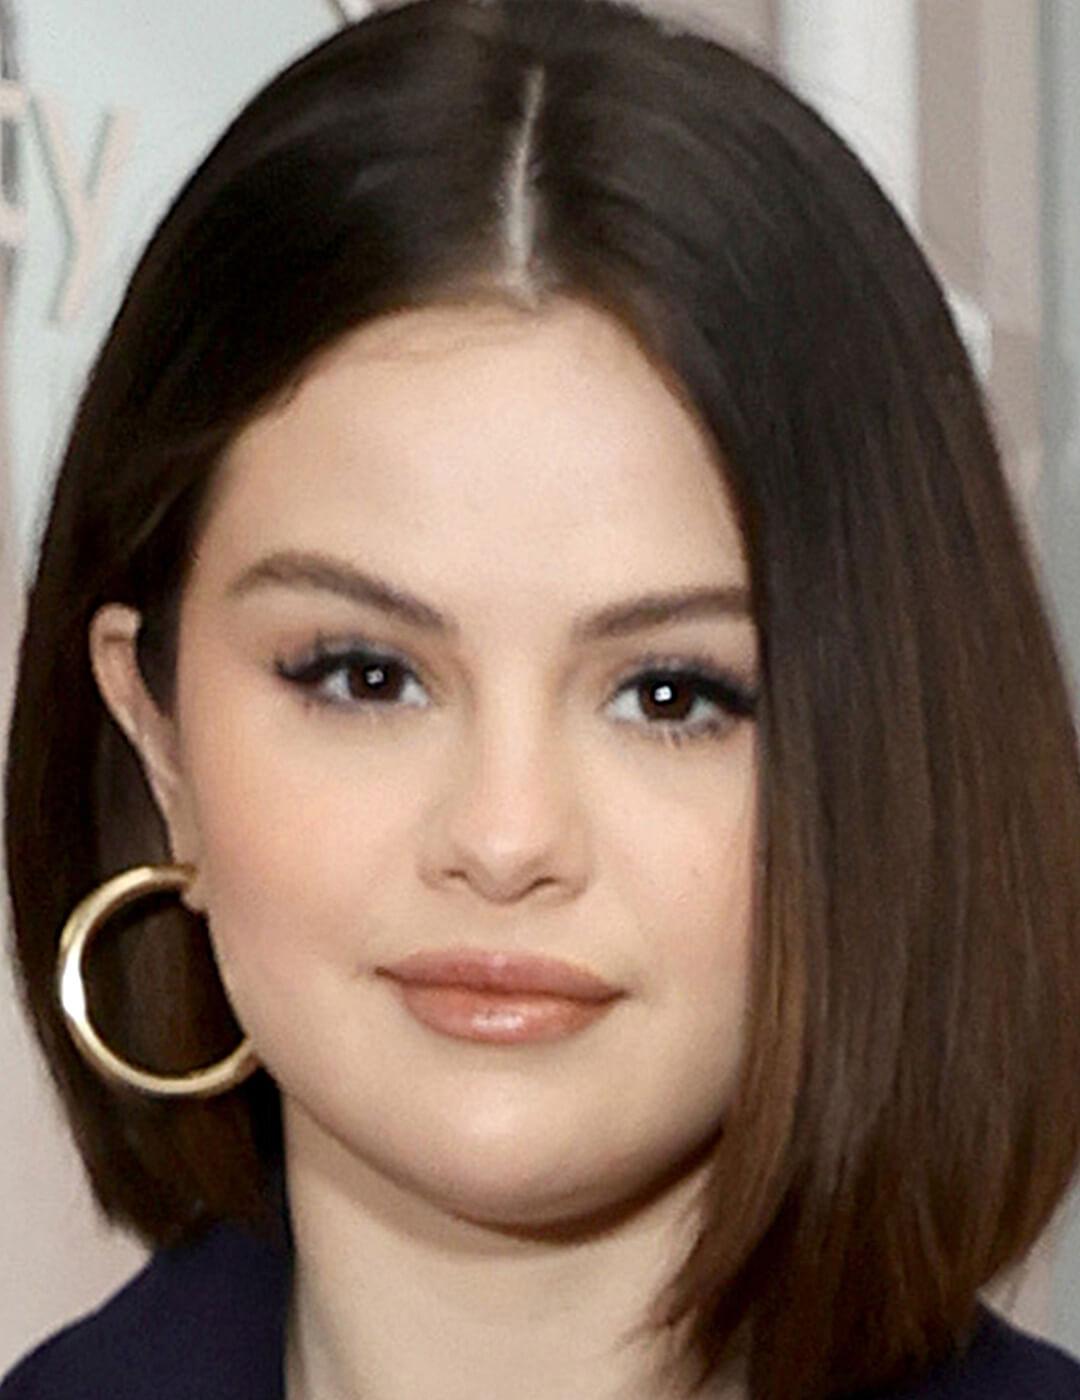 Selena Gomez rocking a natural makeup look, bob hairstyle, and gold hoop earrings